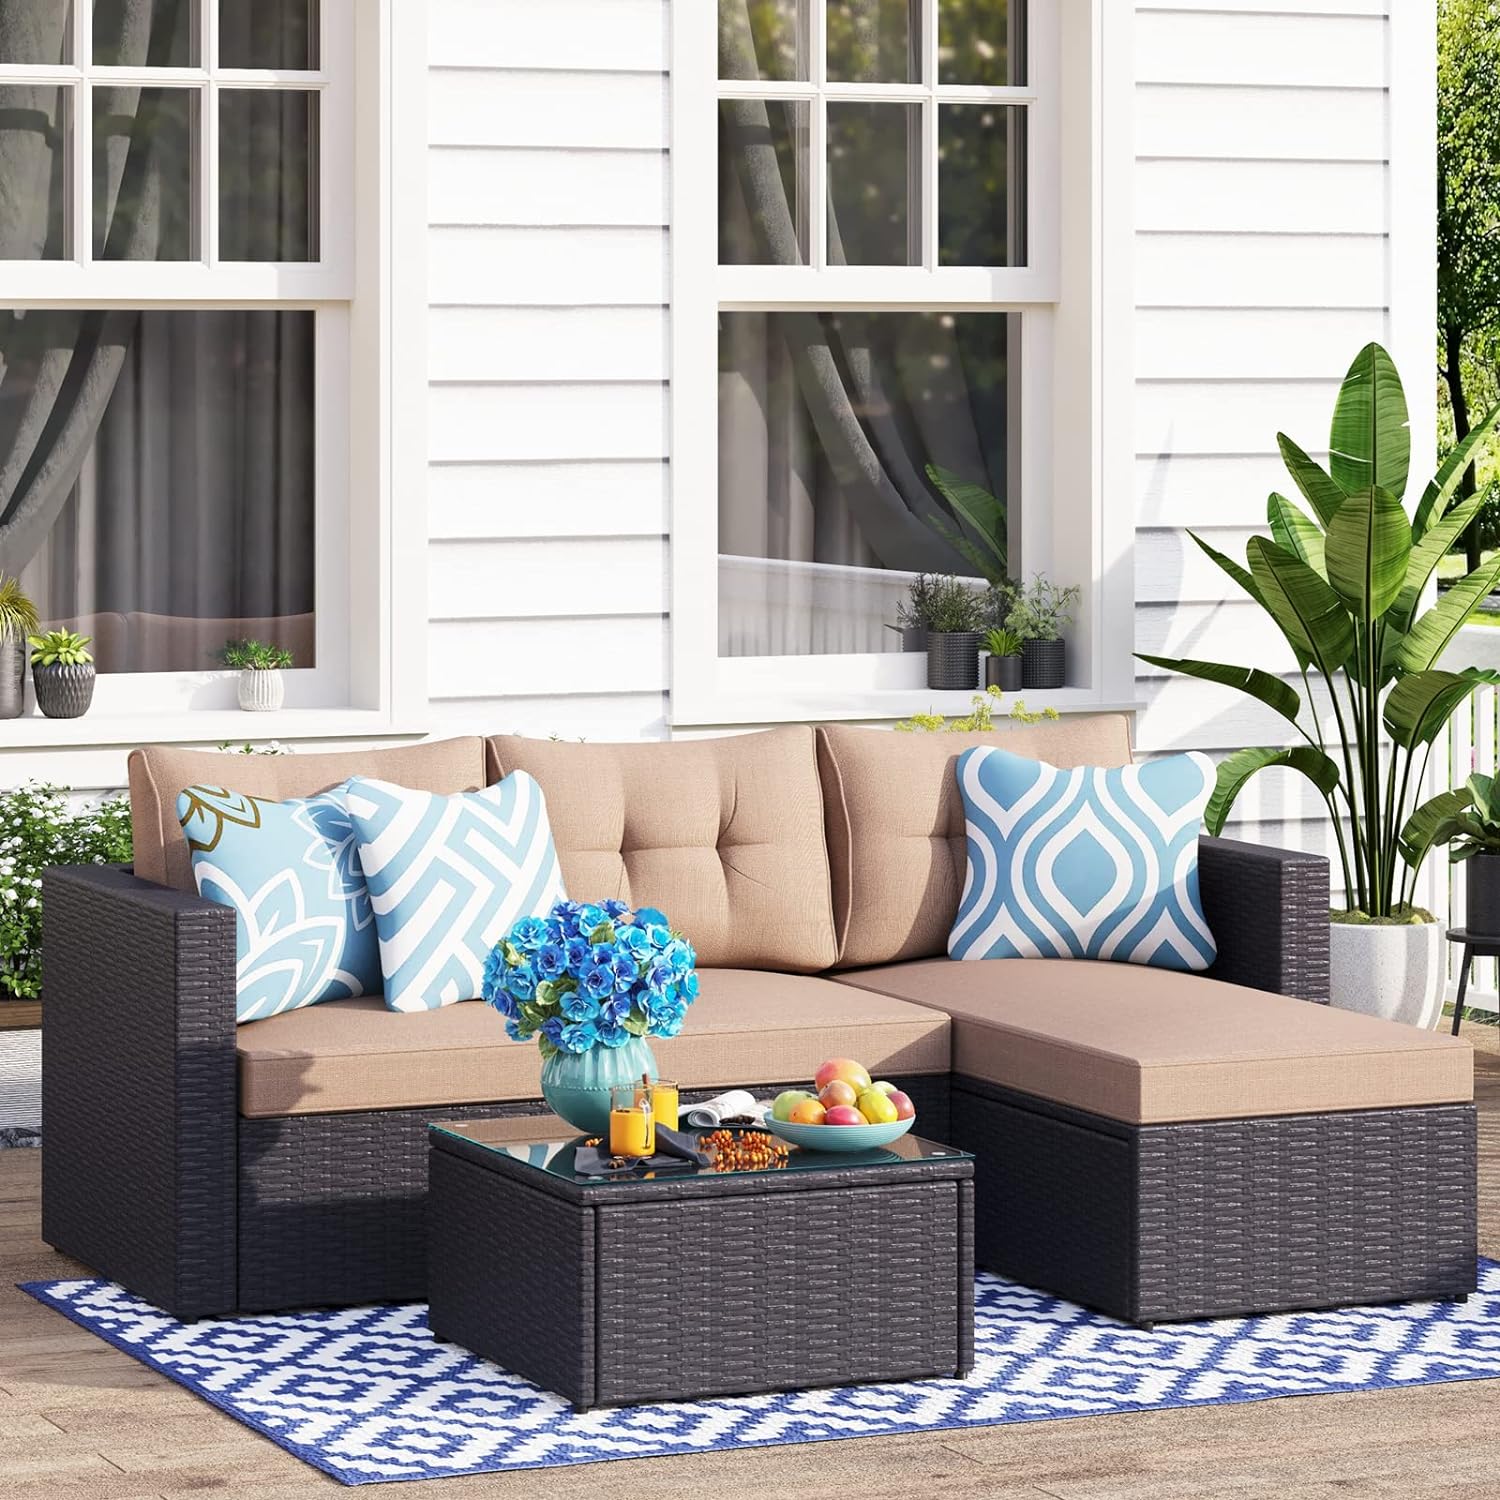 PHI VILLA Patio Sofa Set,3 Pieces All-Weather Upgrade Wicker Outdoor Sectional Sofa,L-Shaped Small Patio Conversation Furniture Set with Cushion and Coffee Table(Beige)